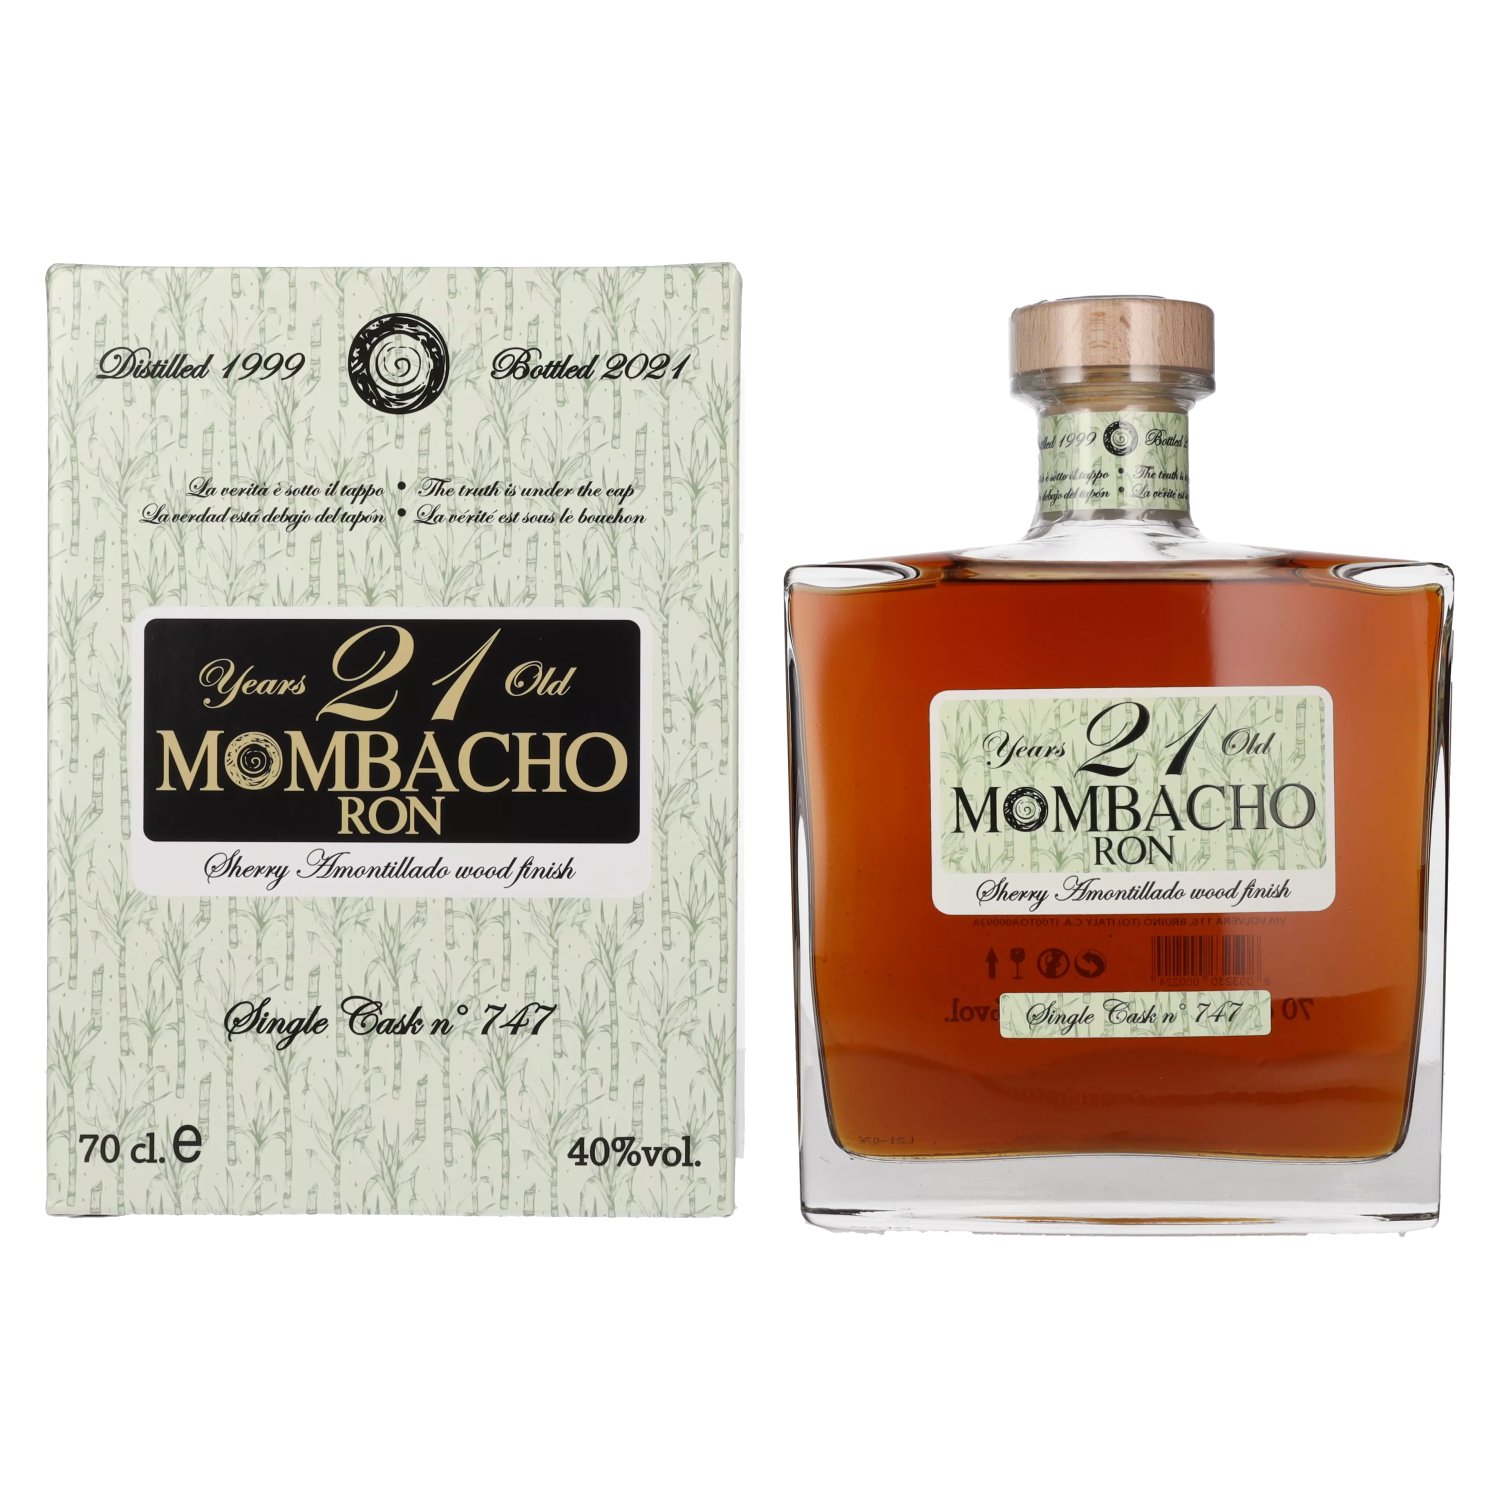 Sherry Giftbox Mombacho Vol. 40% 0,7l in Years Ron Finish Amontillado Old 21 Wood